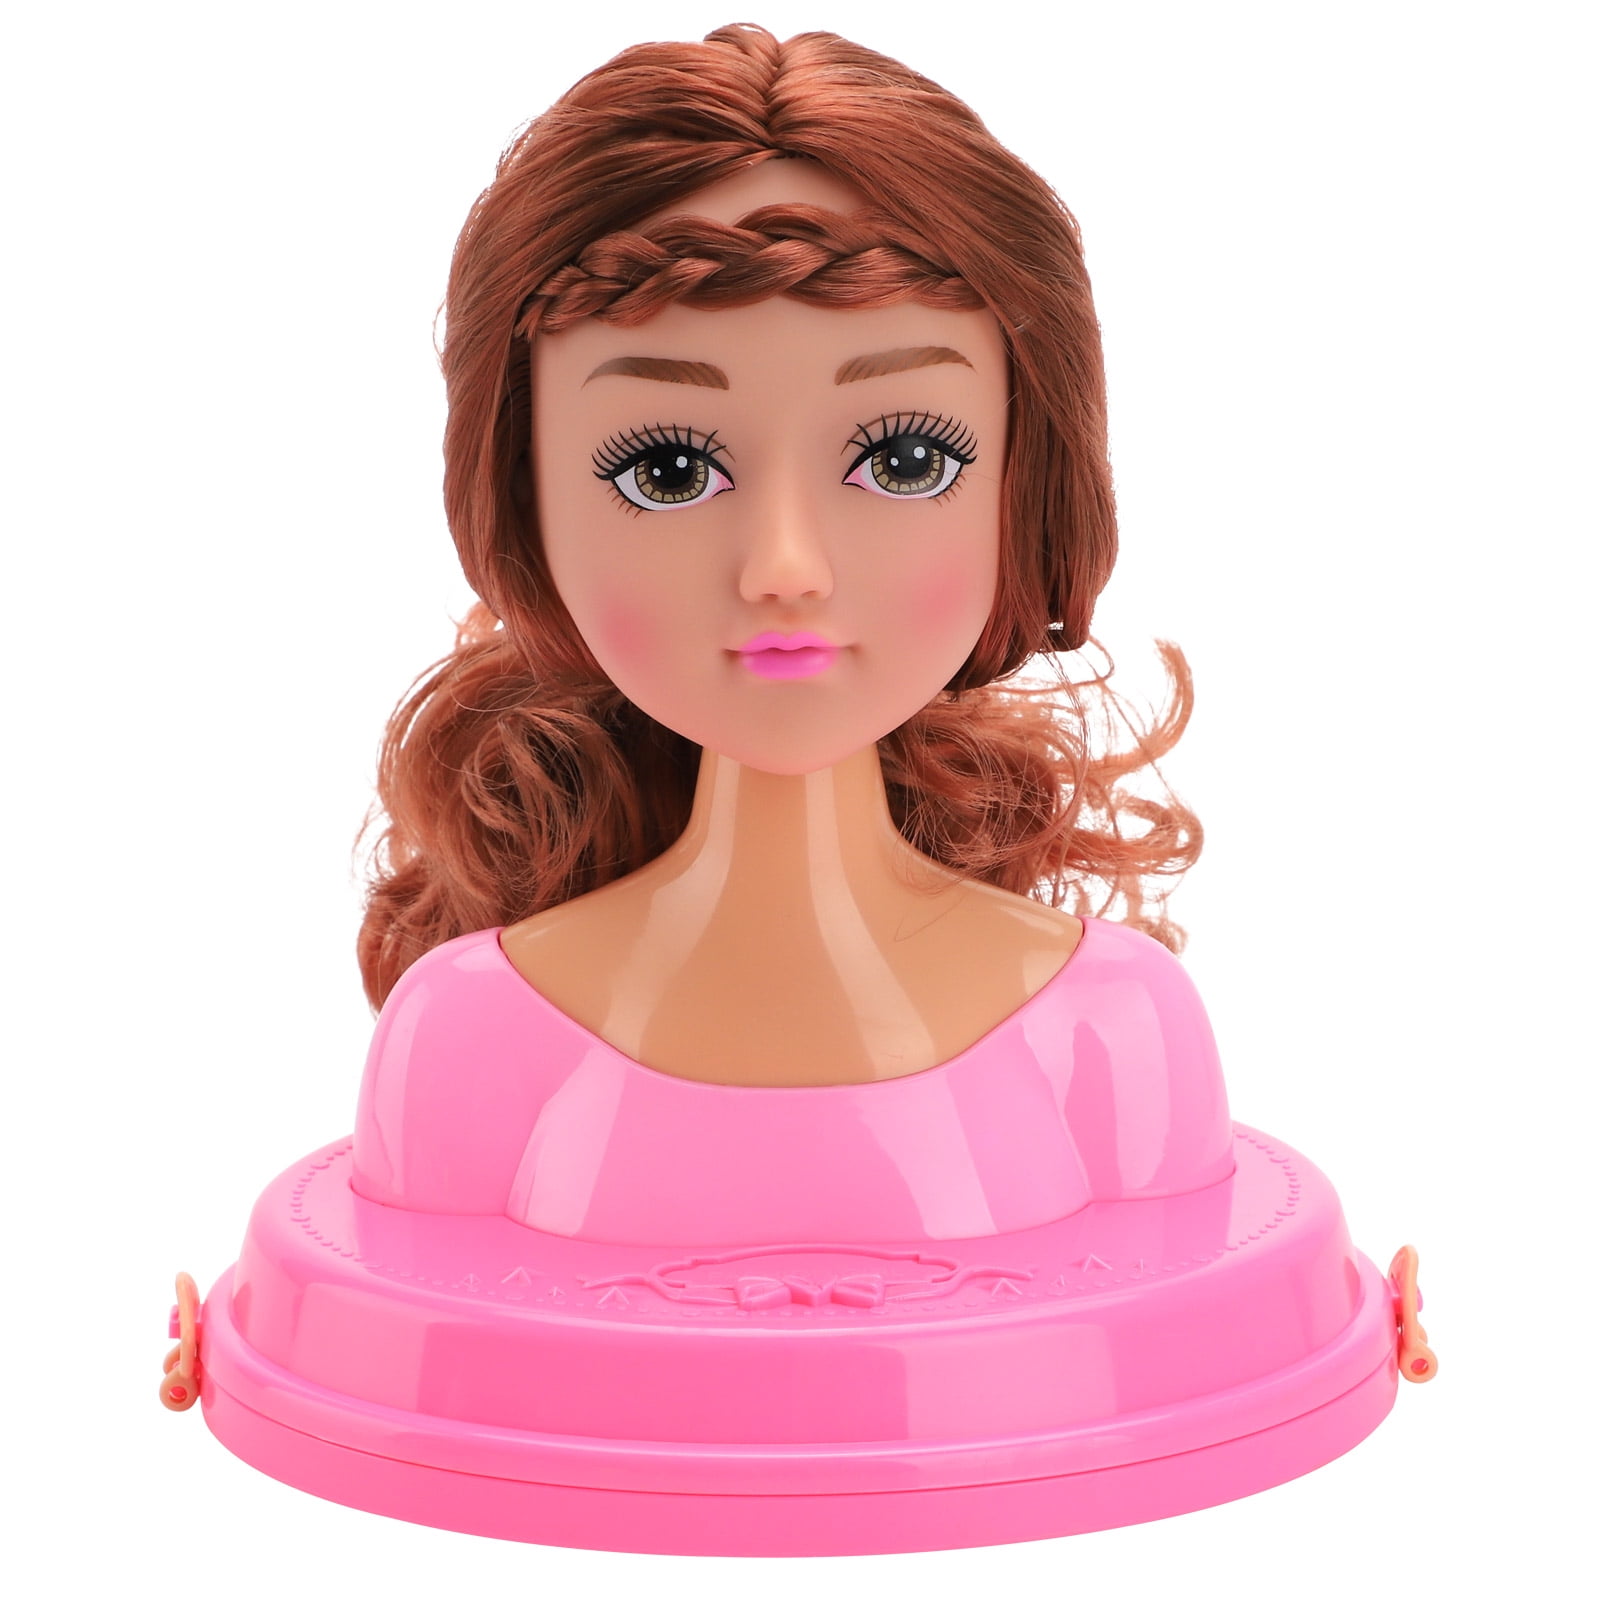 Styling Doll Doll Head For Hair Styling With Hair Dryer Doll Head Toy  Pretend Play Cosmetic Set Comb Rubber Band Dressing Case - Beauty & Fashion  Toys - AliExpress